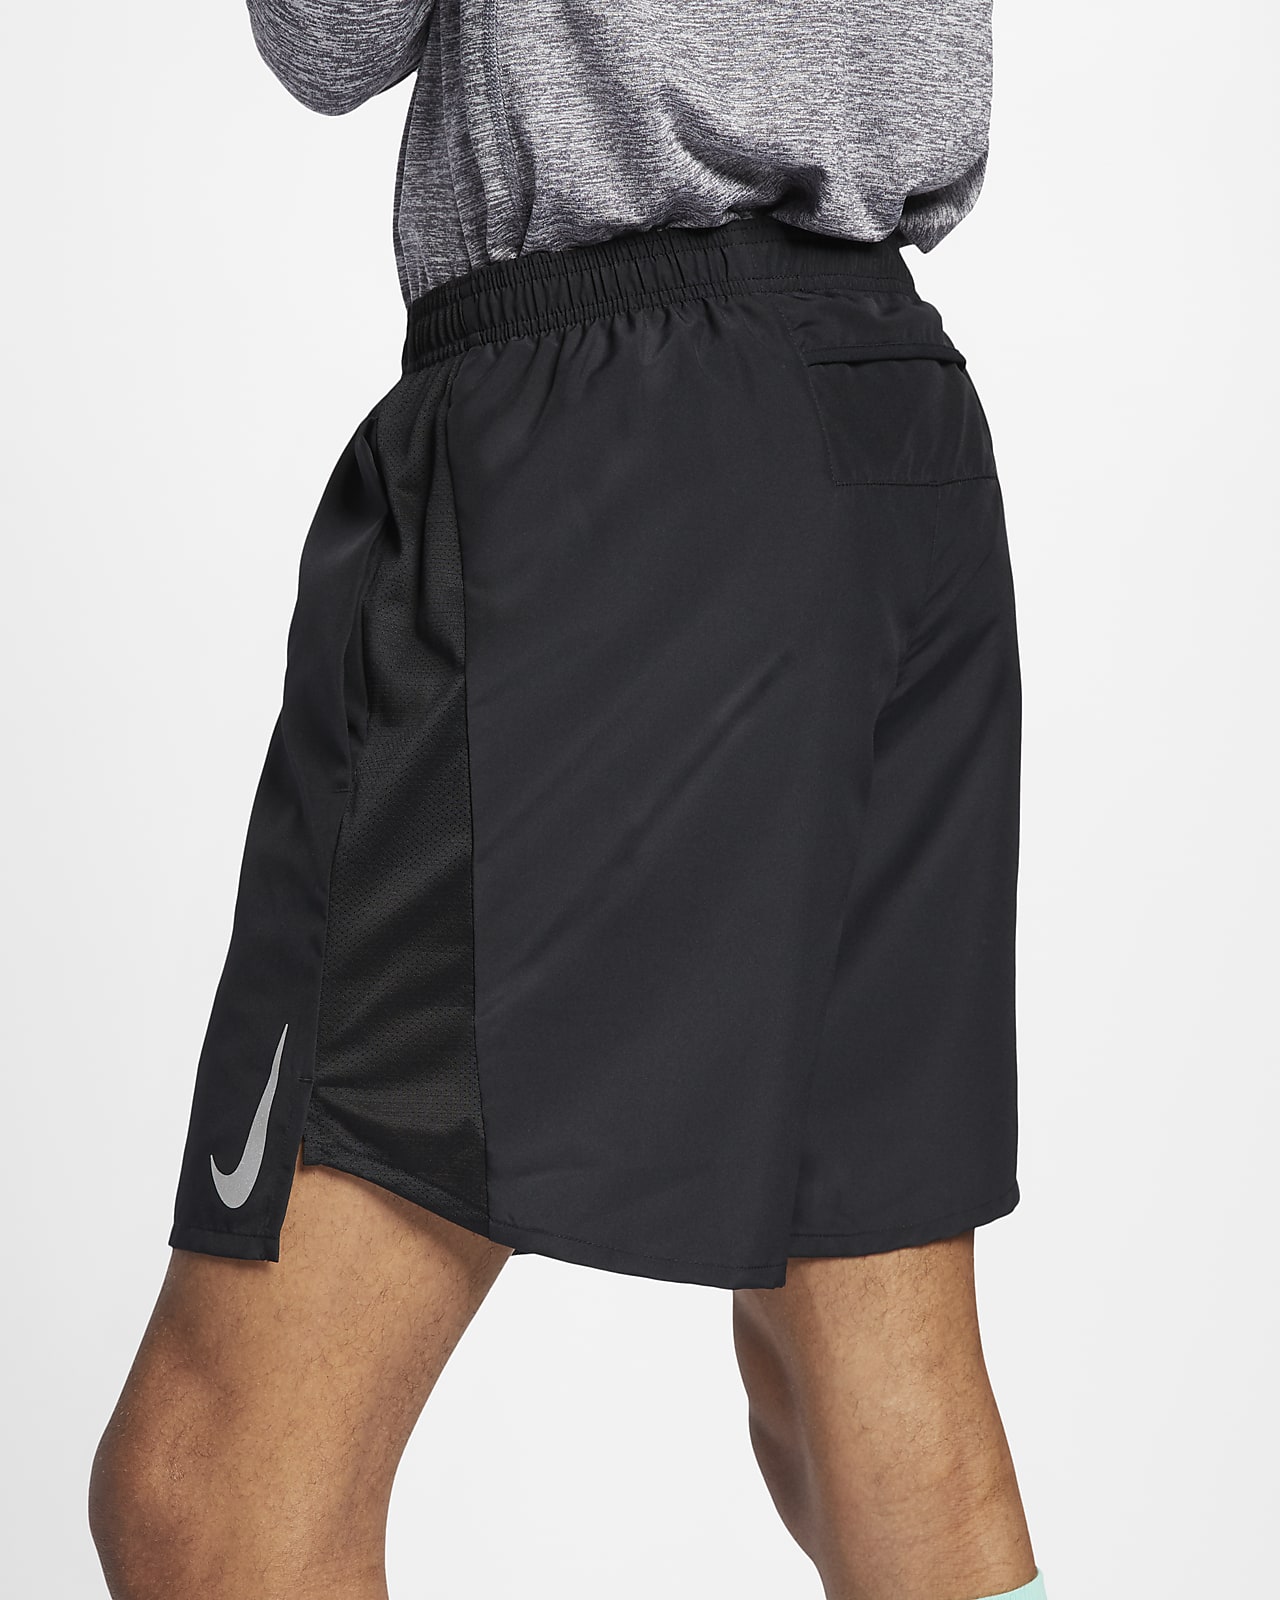 Lined Running Shorts. Nike MY